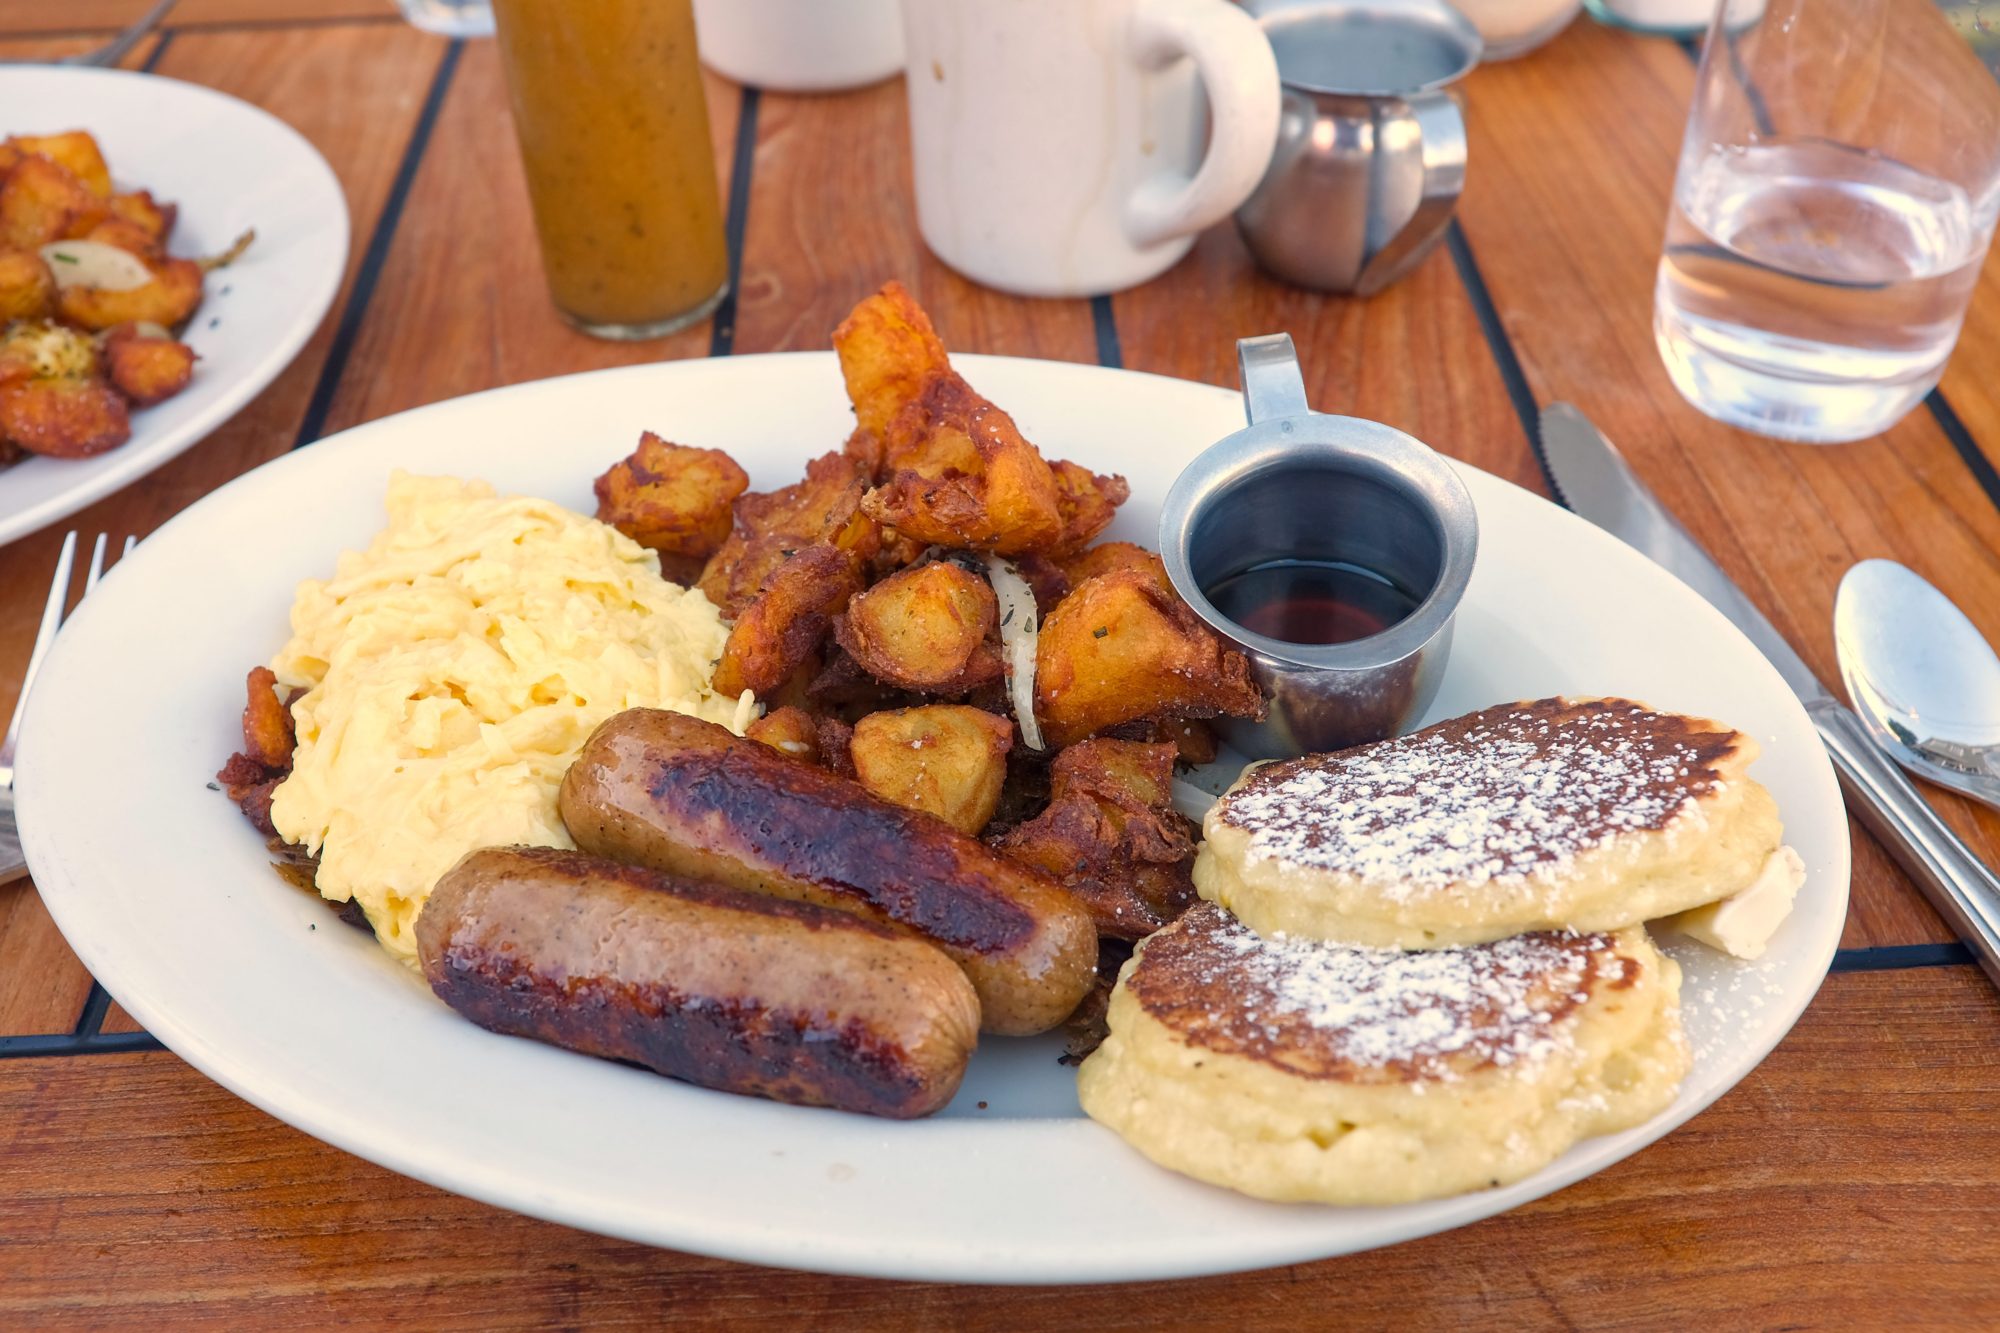 A plate of pancakes, eggs, sausage, and potatoes at Plow